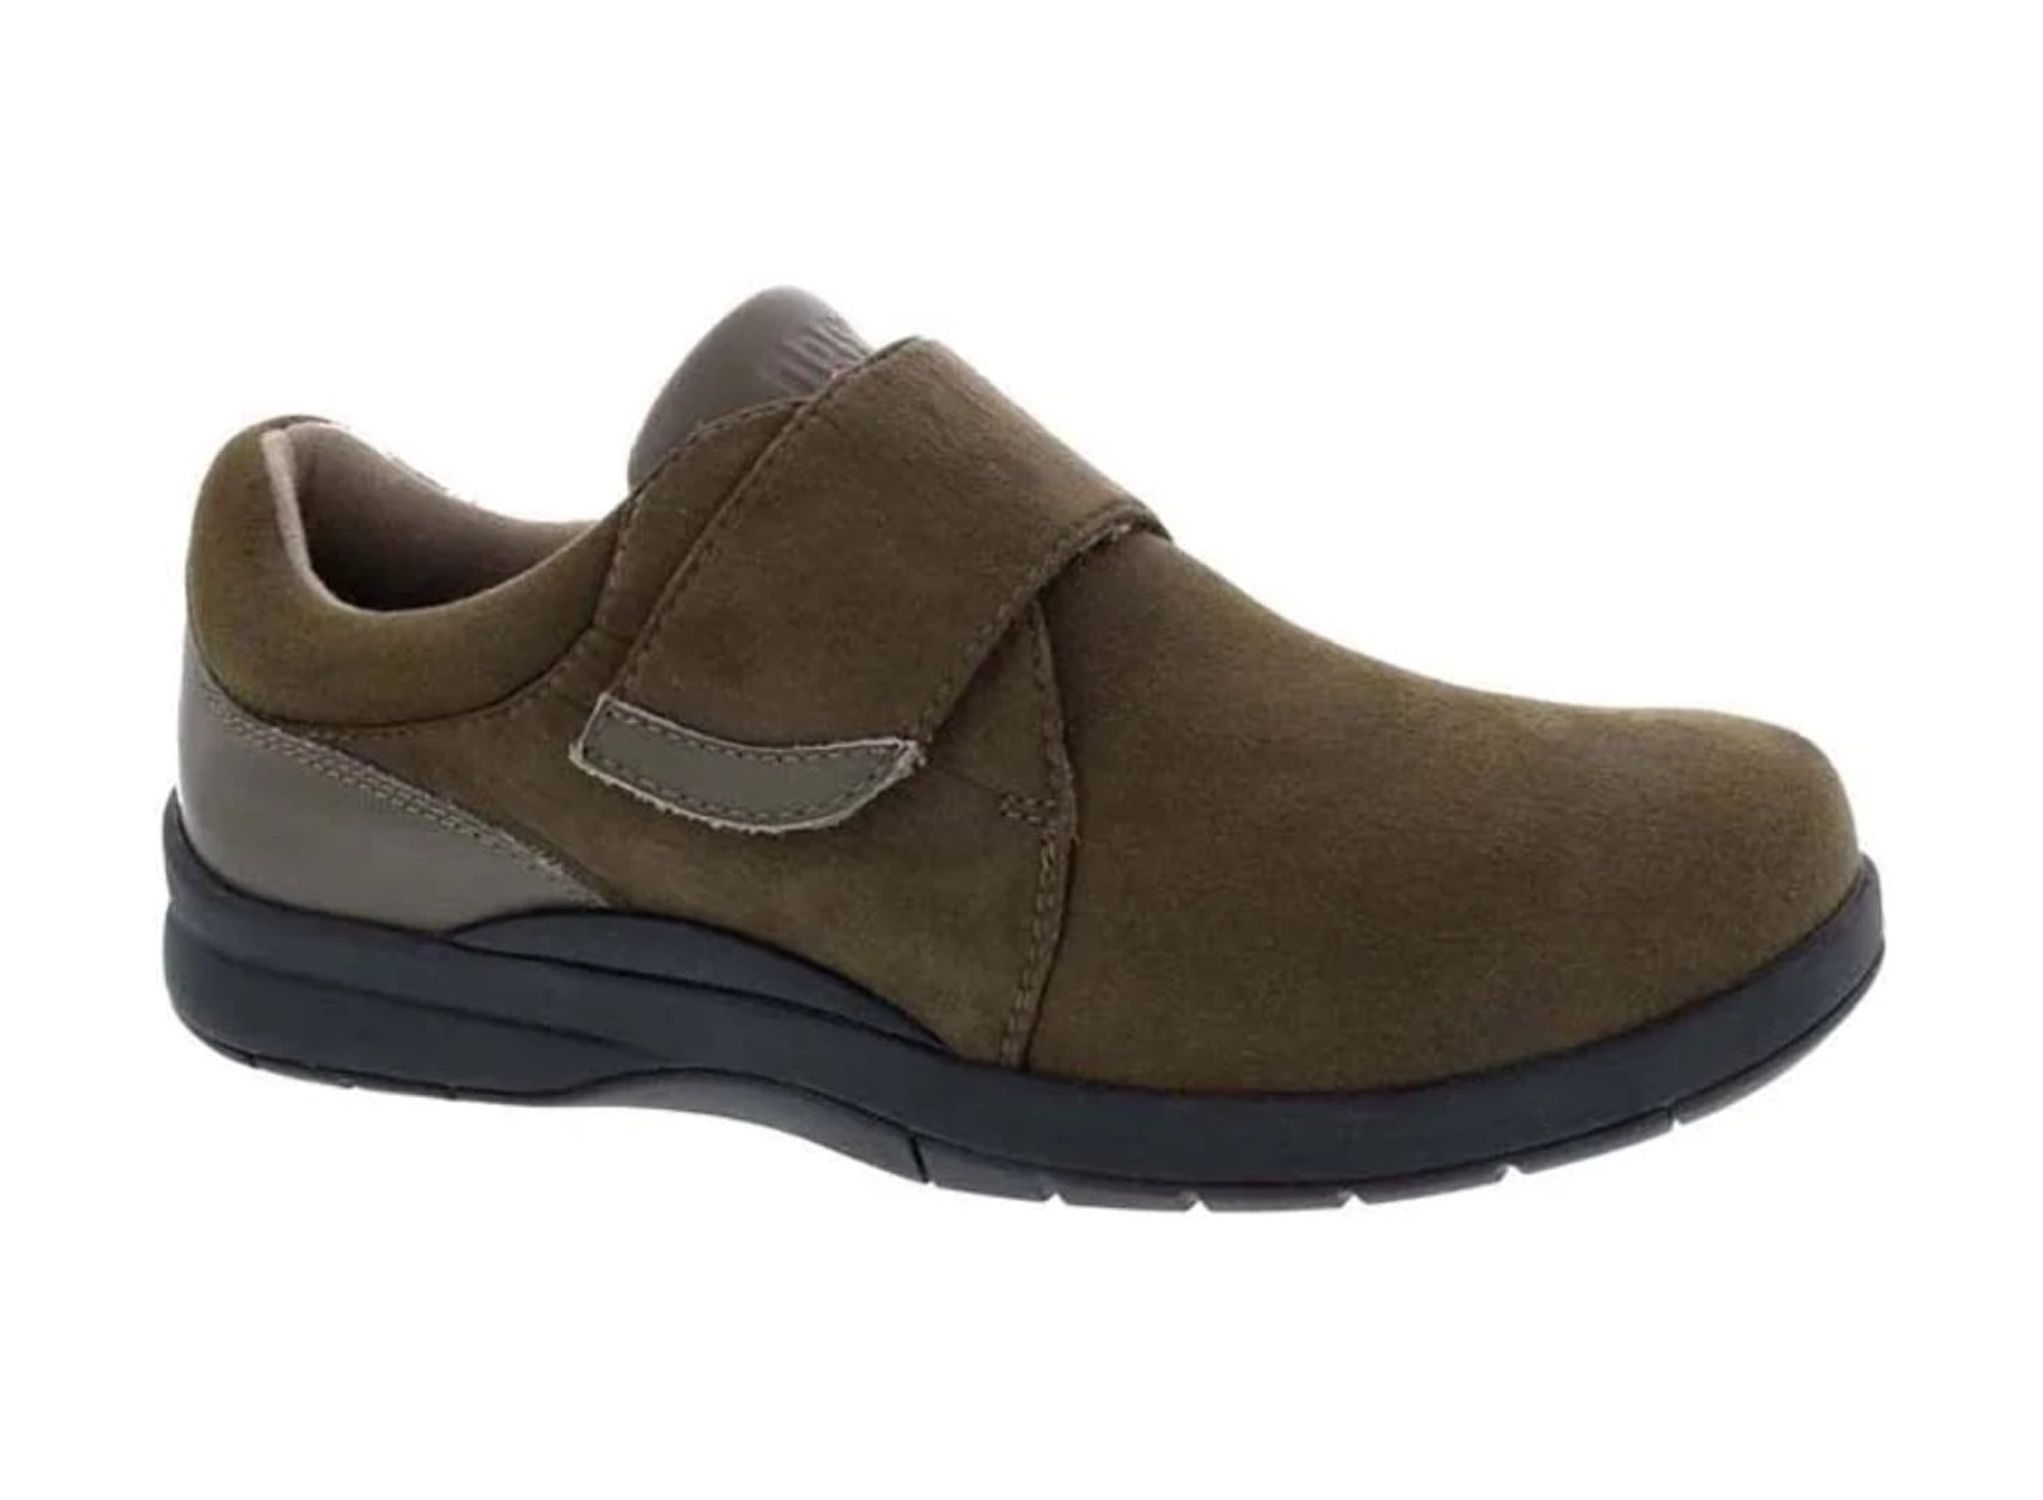 DREW MOONWALK WOMEN CASUAL SHOE IN OLIVE STRETCH LEATHER - image 1 of 4